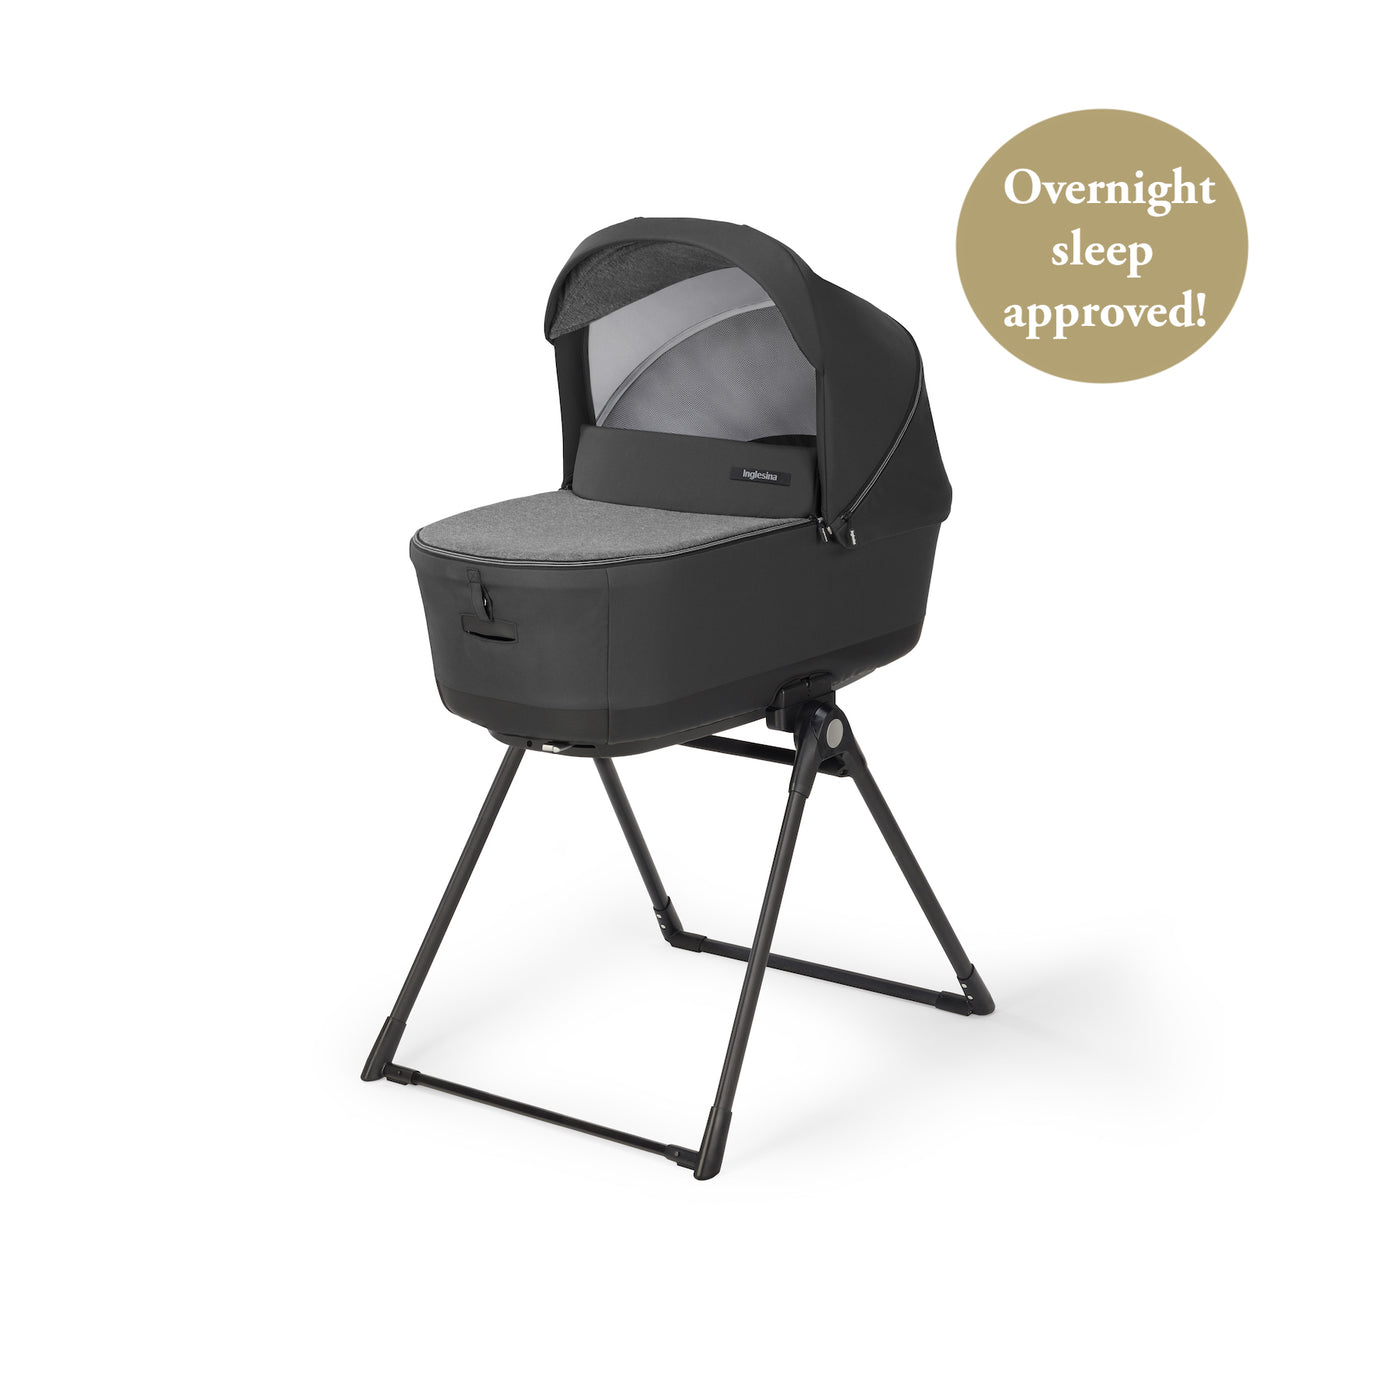 Electa bassinet + stand approved for overnight sleep